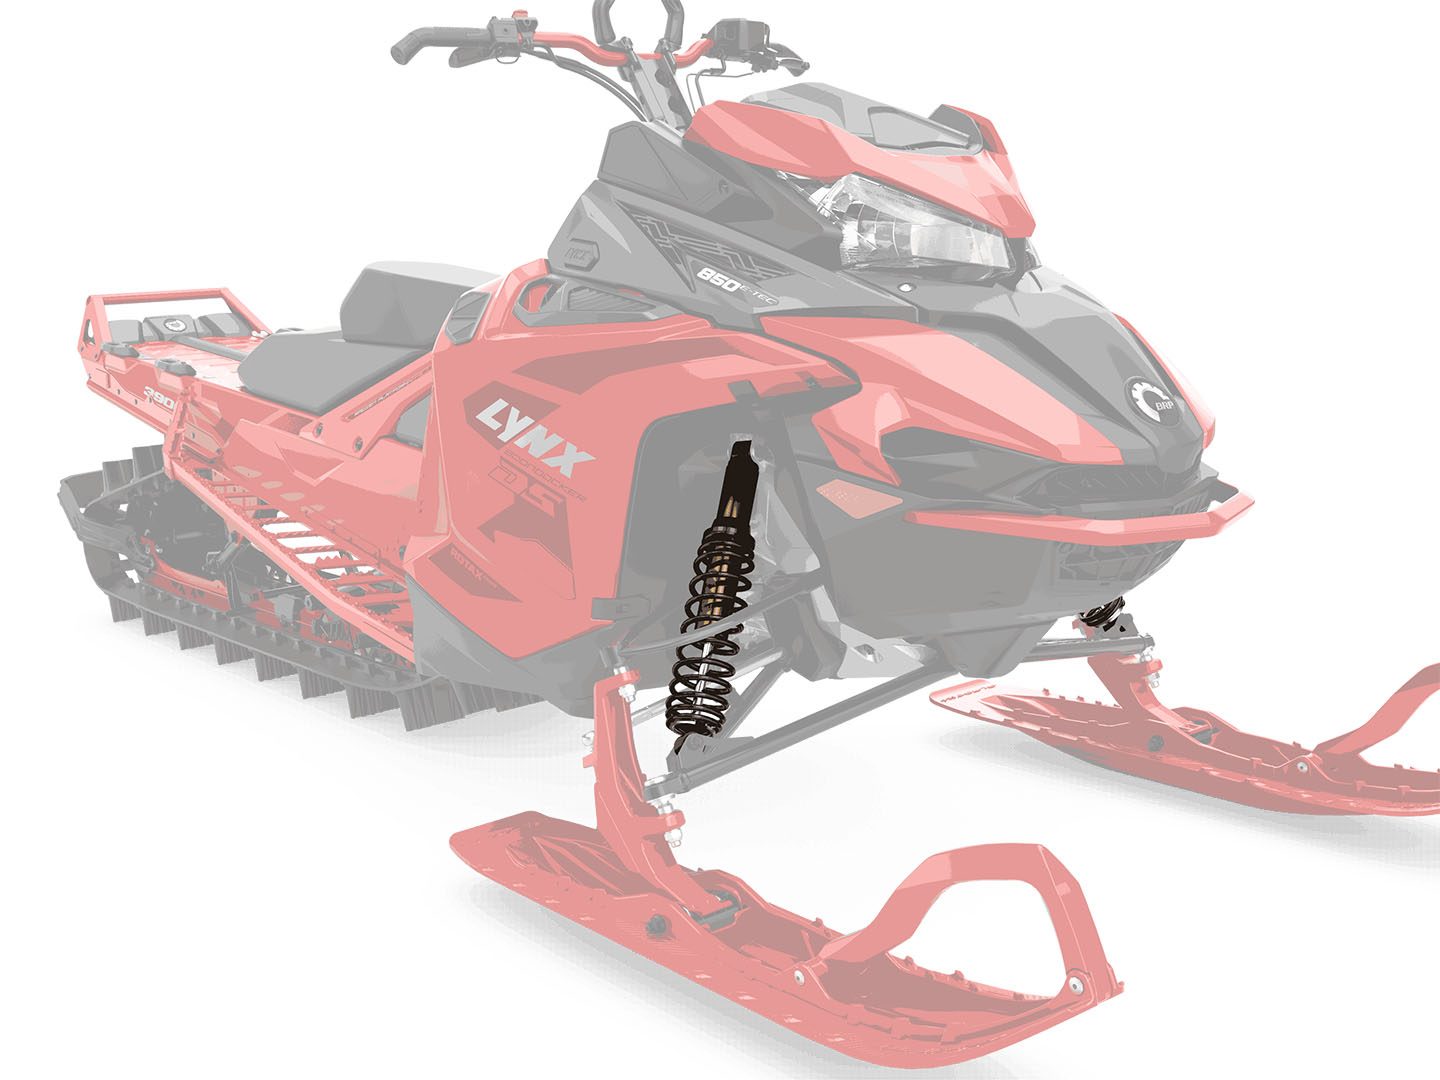 CONTROL IN DEEP SNOW: KYB Kashima shock absorbers - The Kashima coating of KYB shock absorbers on the BoonDocker DS model reduces the internal friction of the shock absorbers, improving the sensitivity of the suspension movement and the handling of the snowmobile. - Photo 8